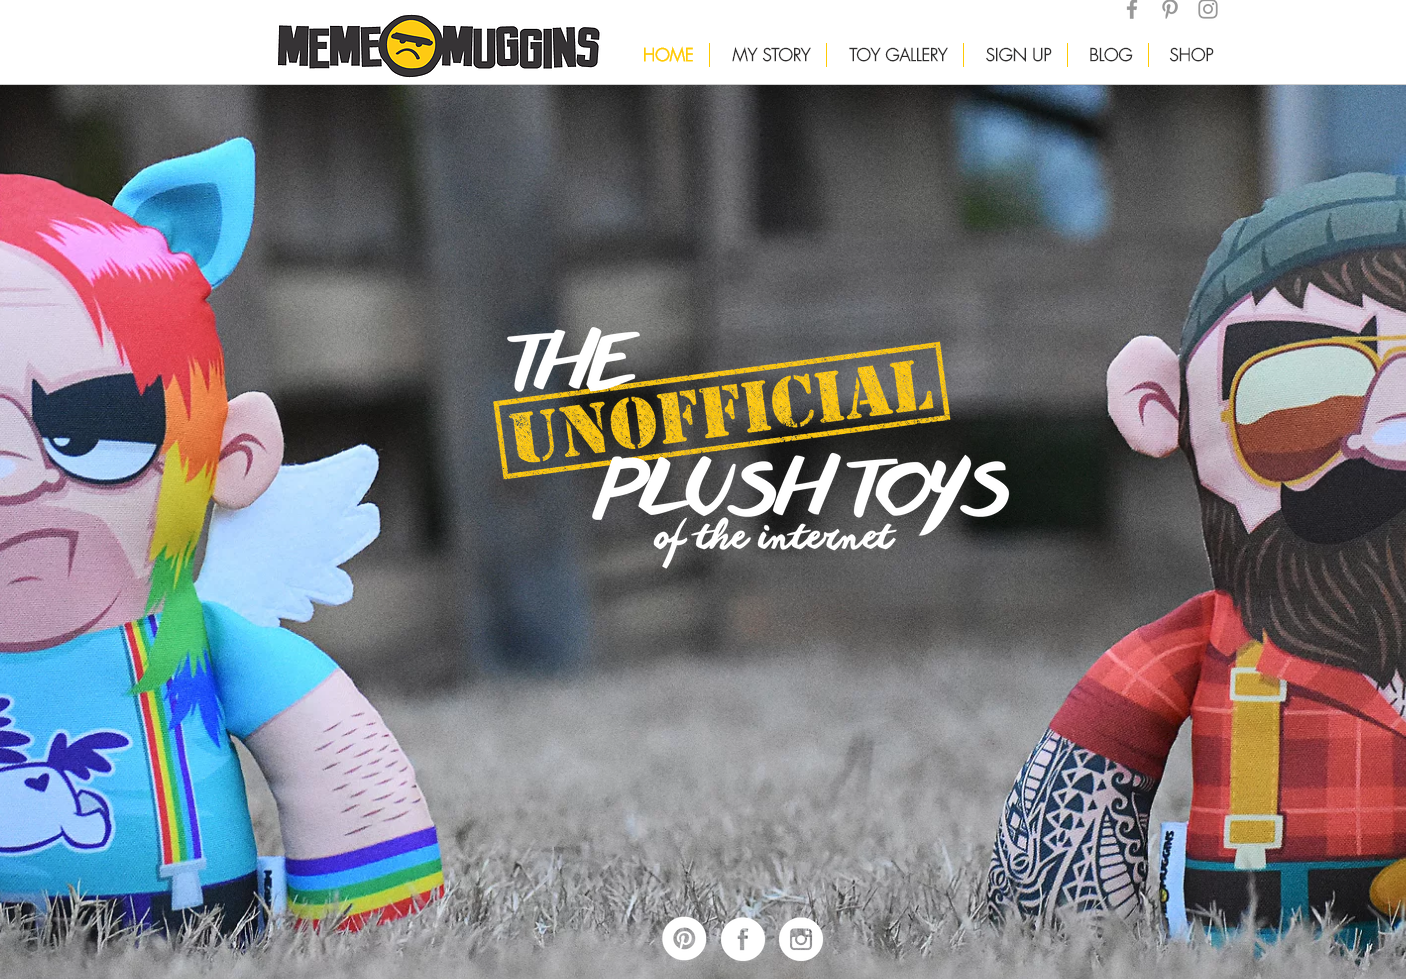 NEW WEBSITE AND TOYS!